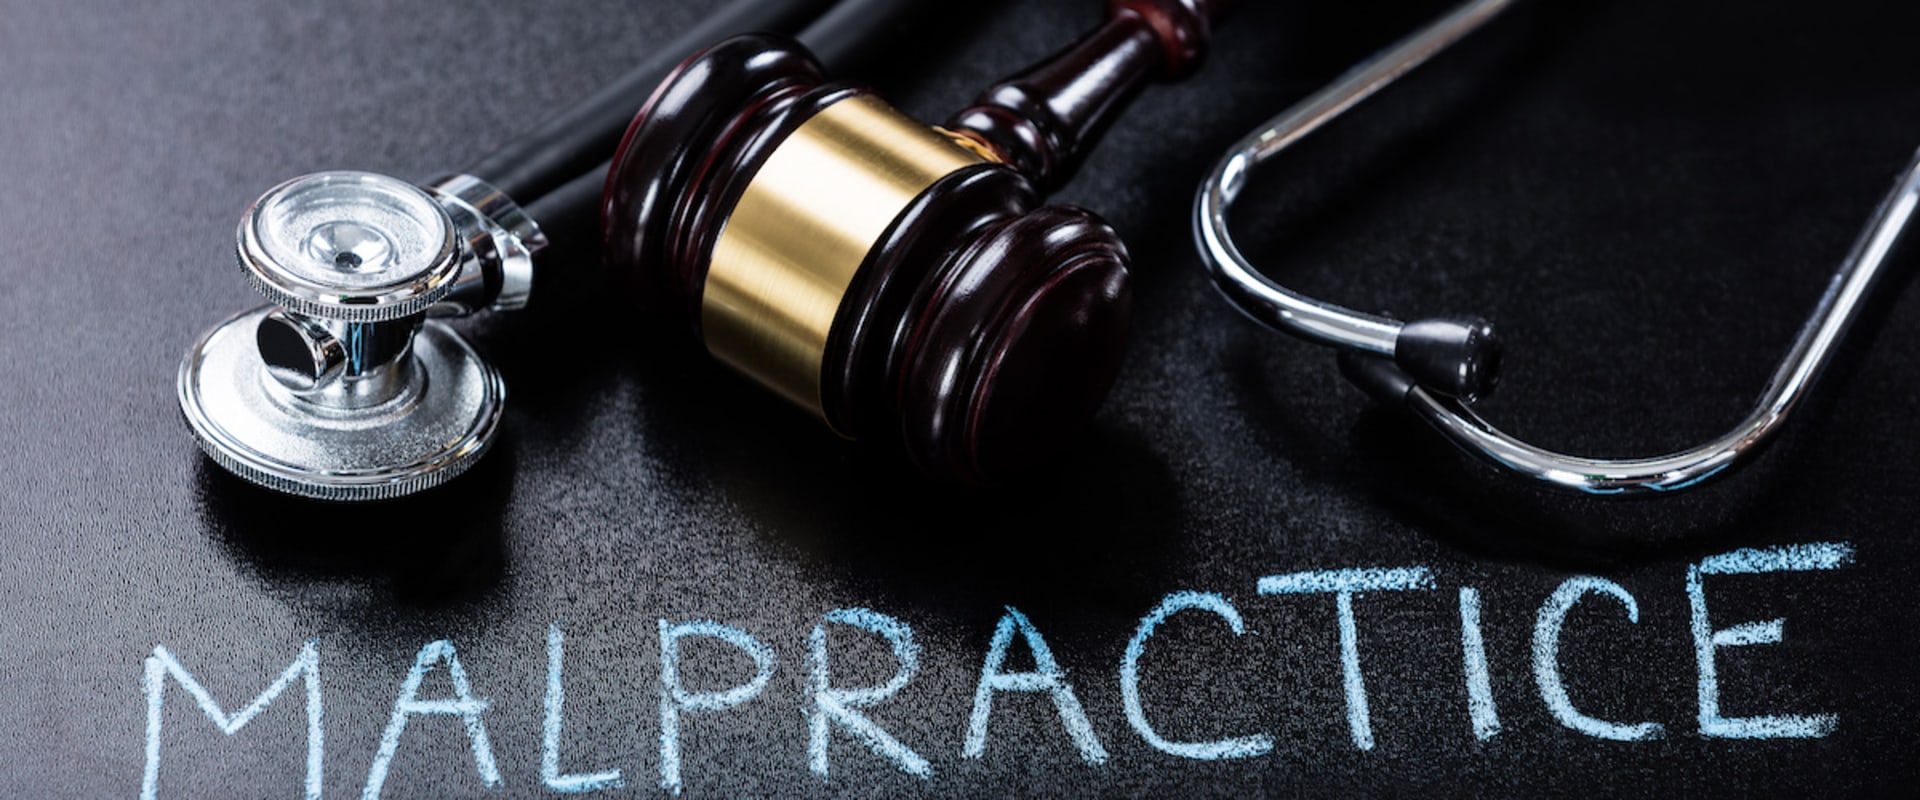 What is statute of limitations for medical malpractice in ny?